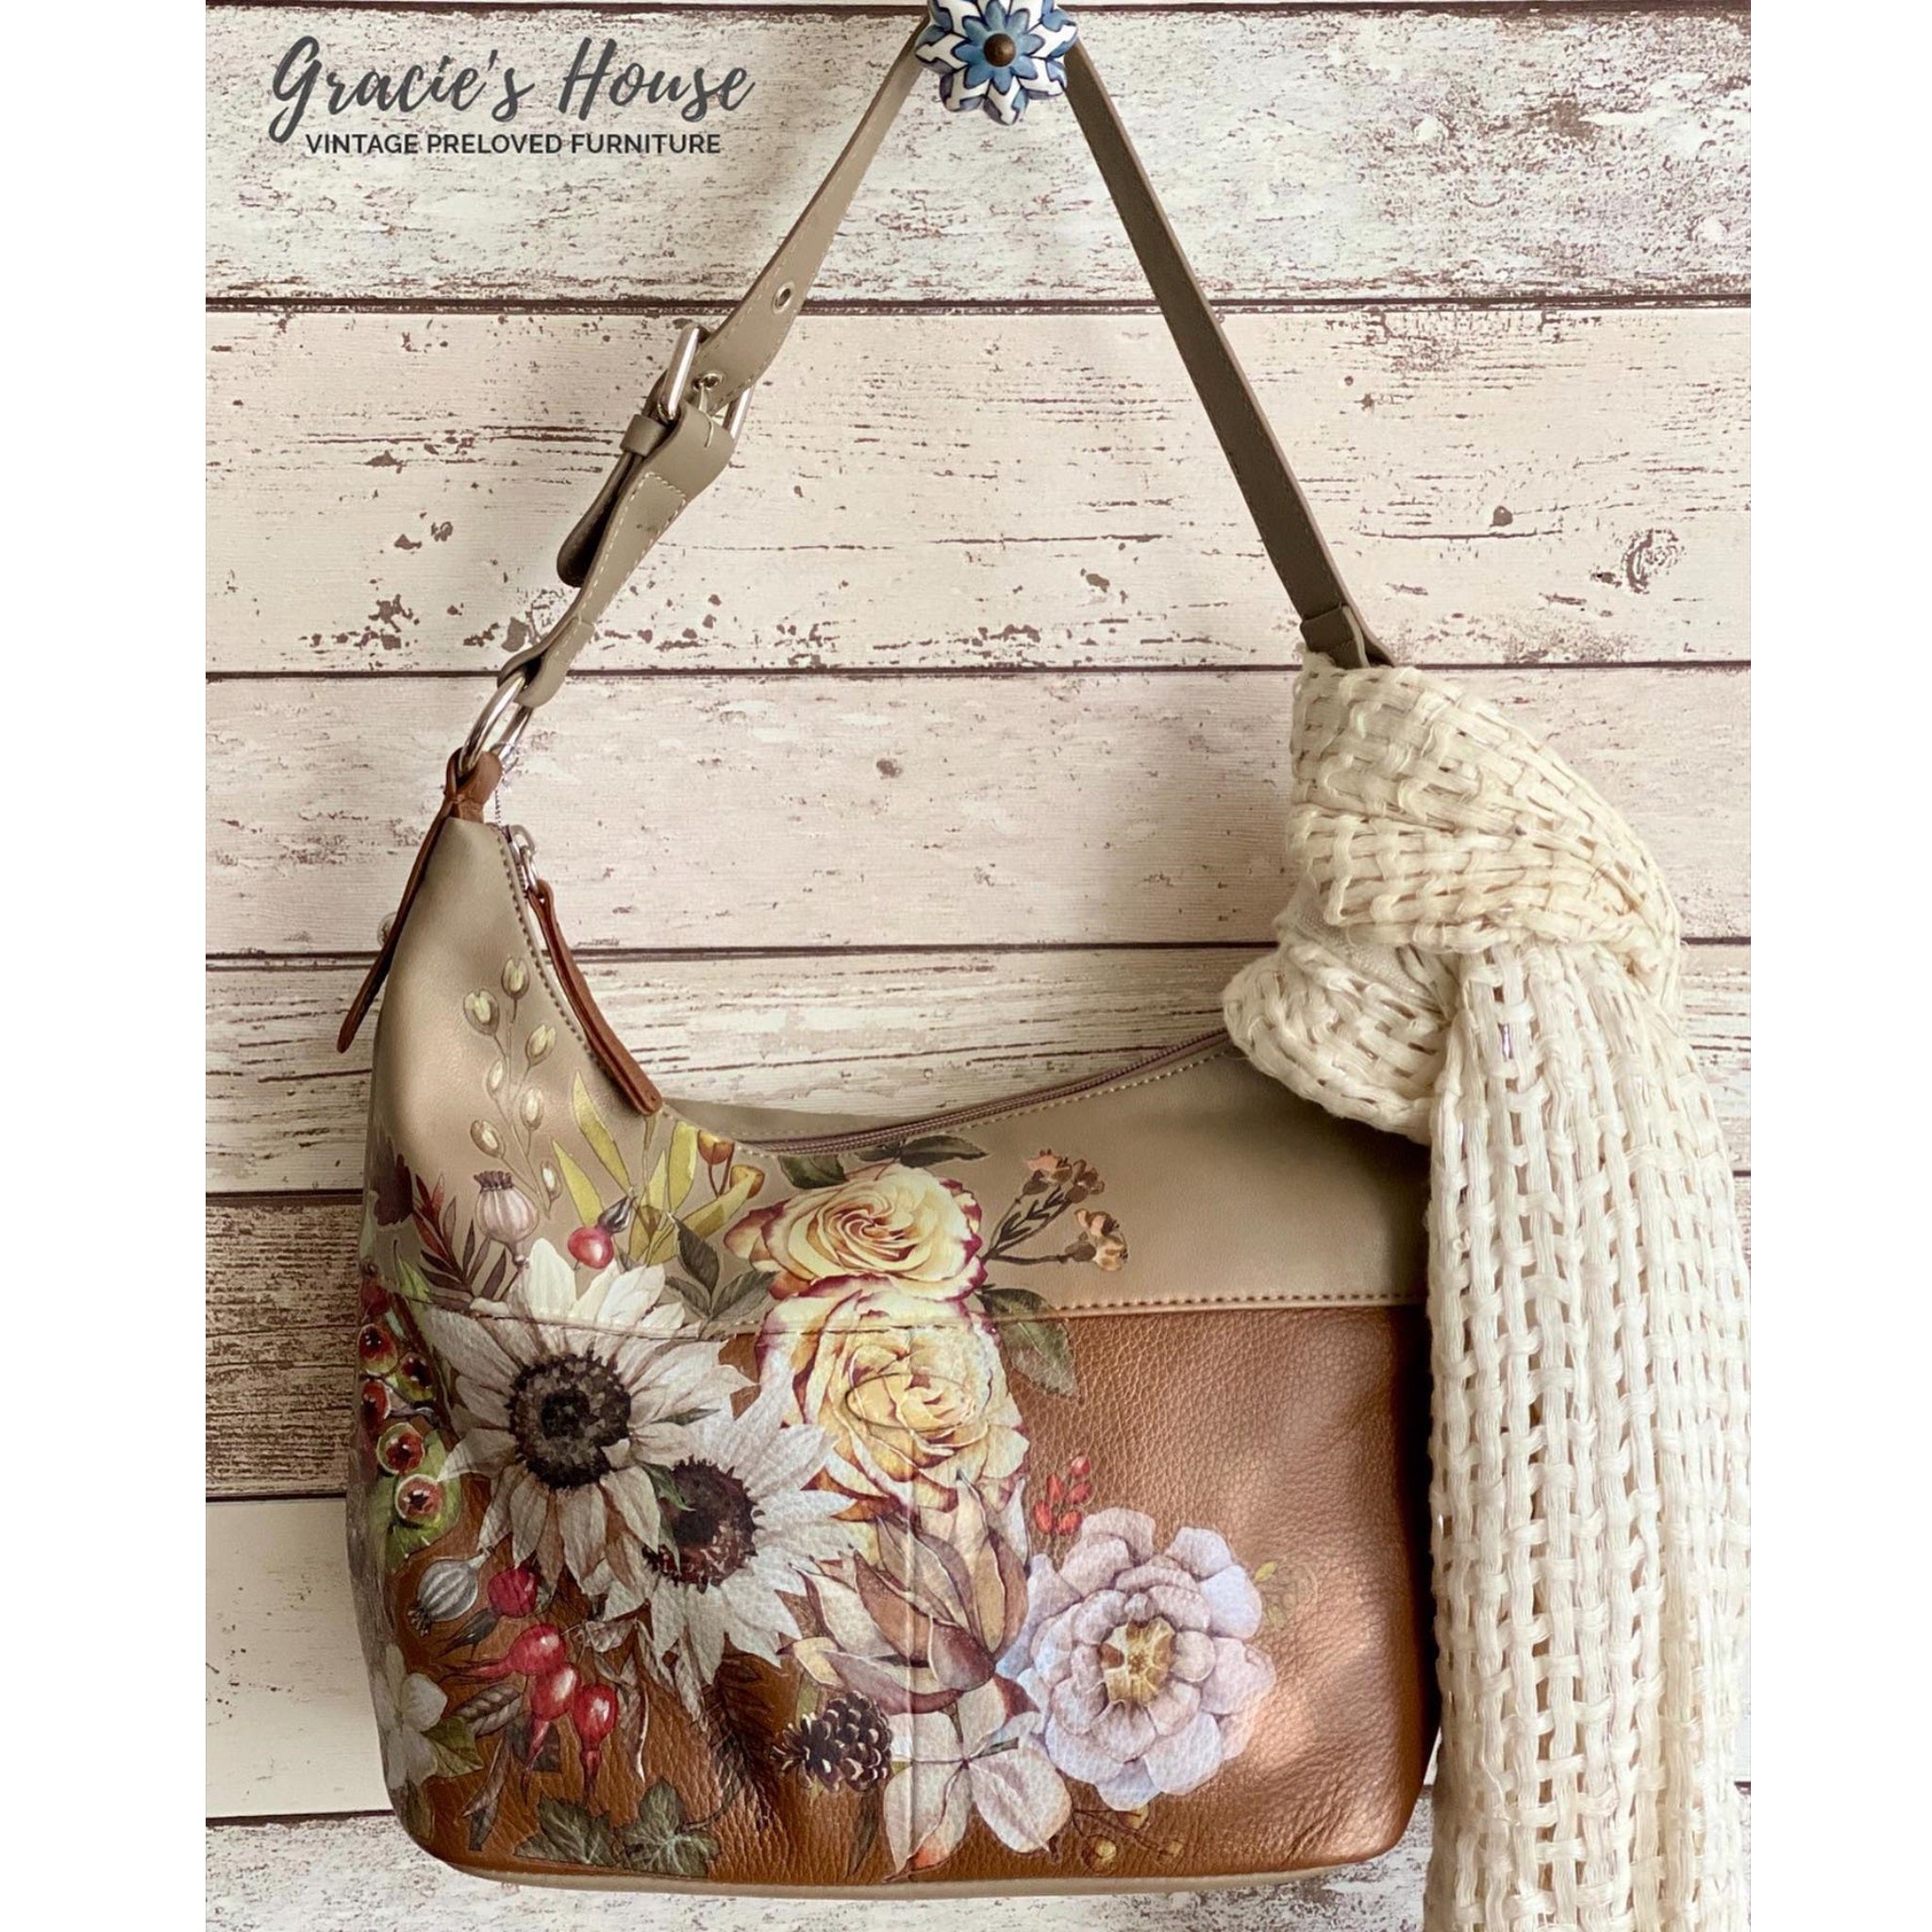 A brown leather purse refurbished by Gracie's House features ReDesign with Prima's Sunflower Farms transfer on it.